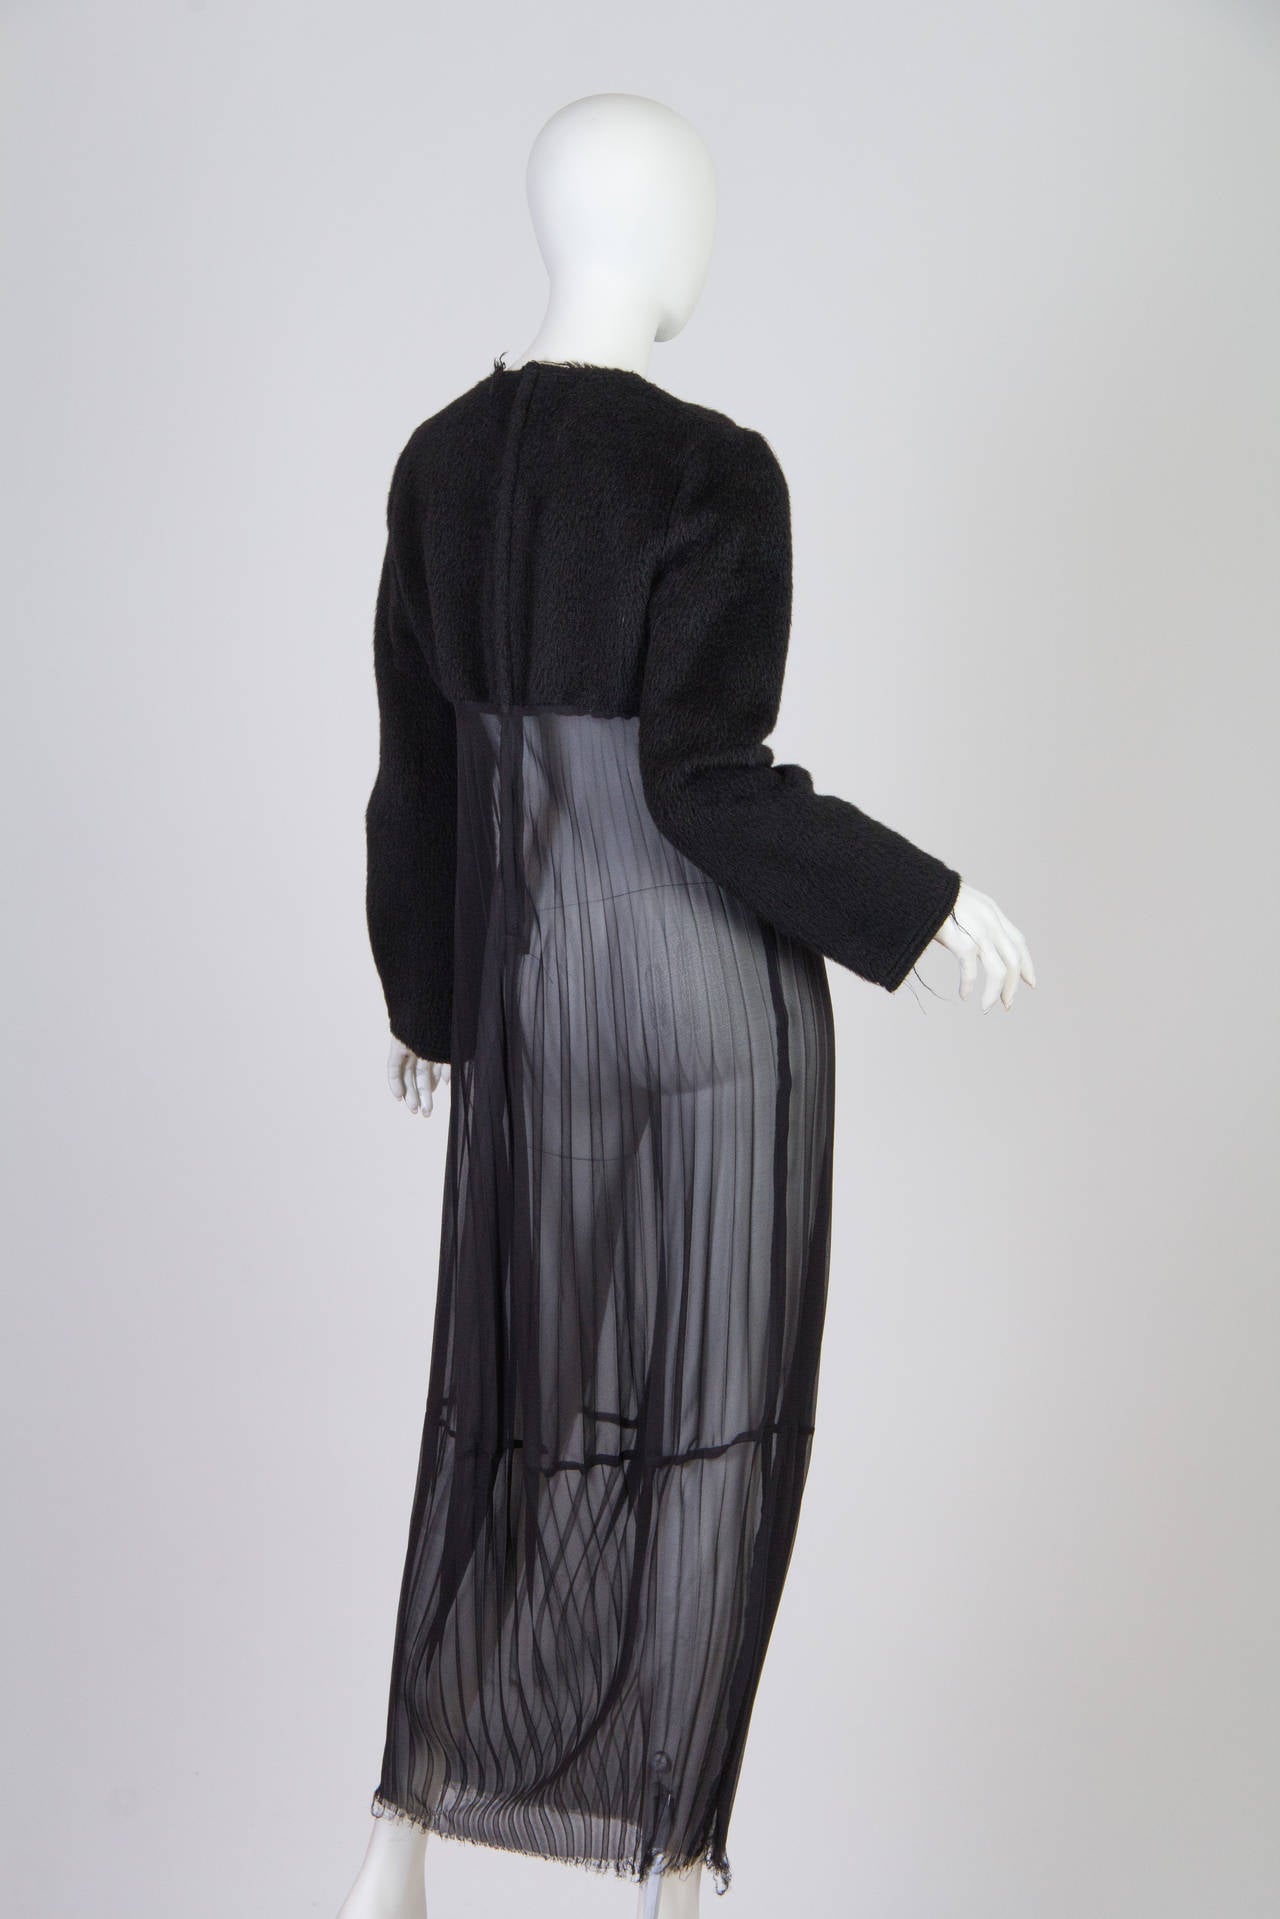 This dress by avant garde design house Comme des Garcons sports a brushed felt-like sweater top and a sheer, pleated silk skirt. The boxy shape of the top and the long, straight sleeves keeps the dress from looking overly slinky or lingerie-like,